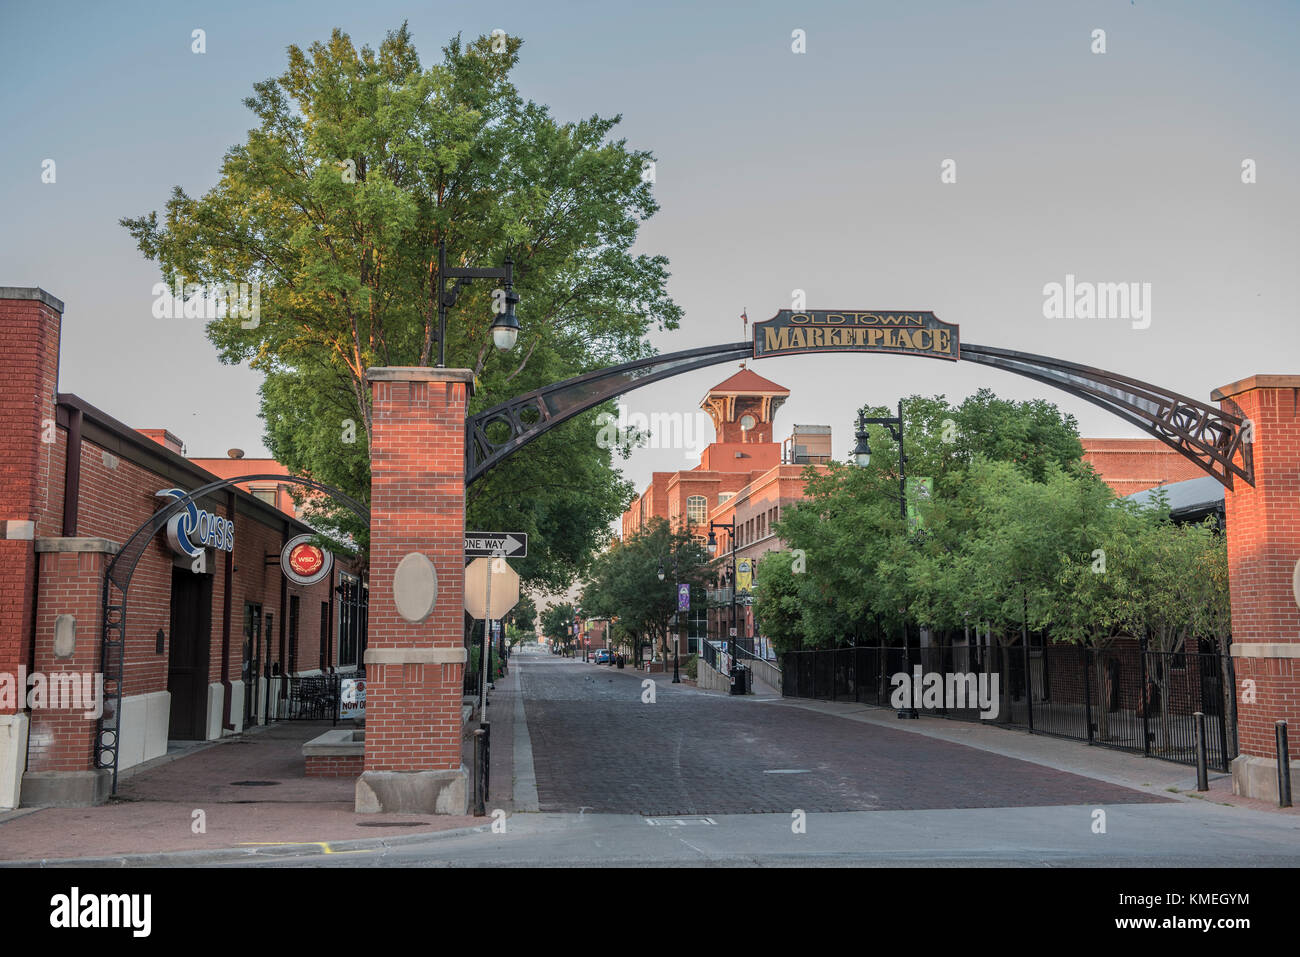 Gate to old town marketplace in Wichita under clear sky,Kansas,USA Stock Photo